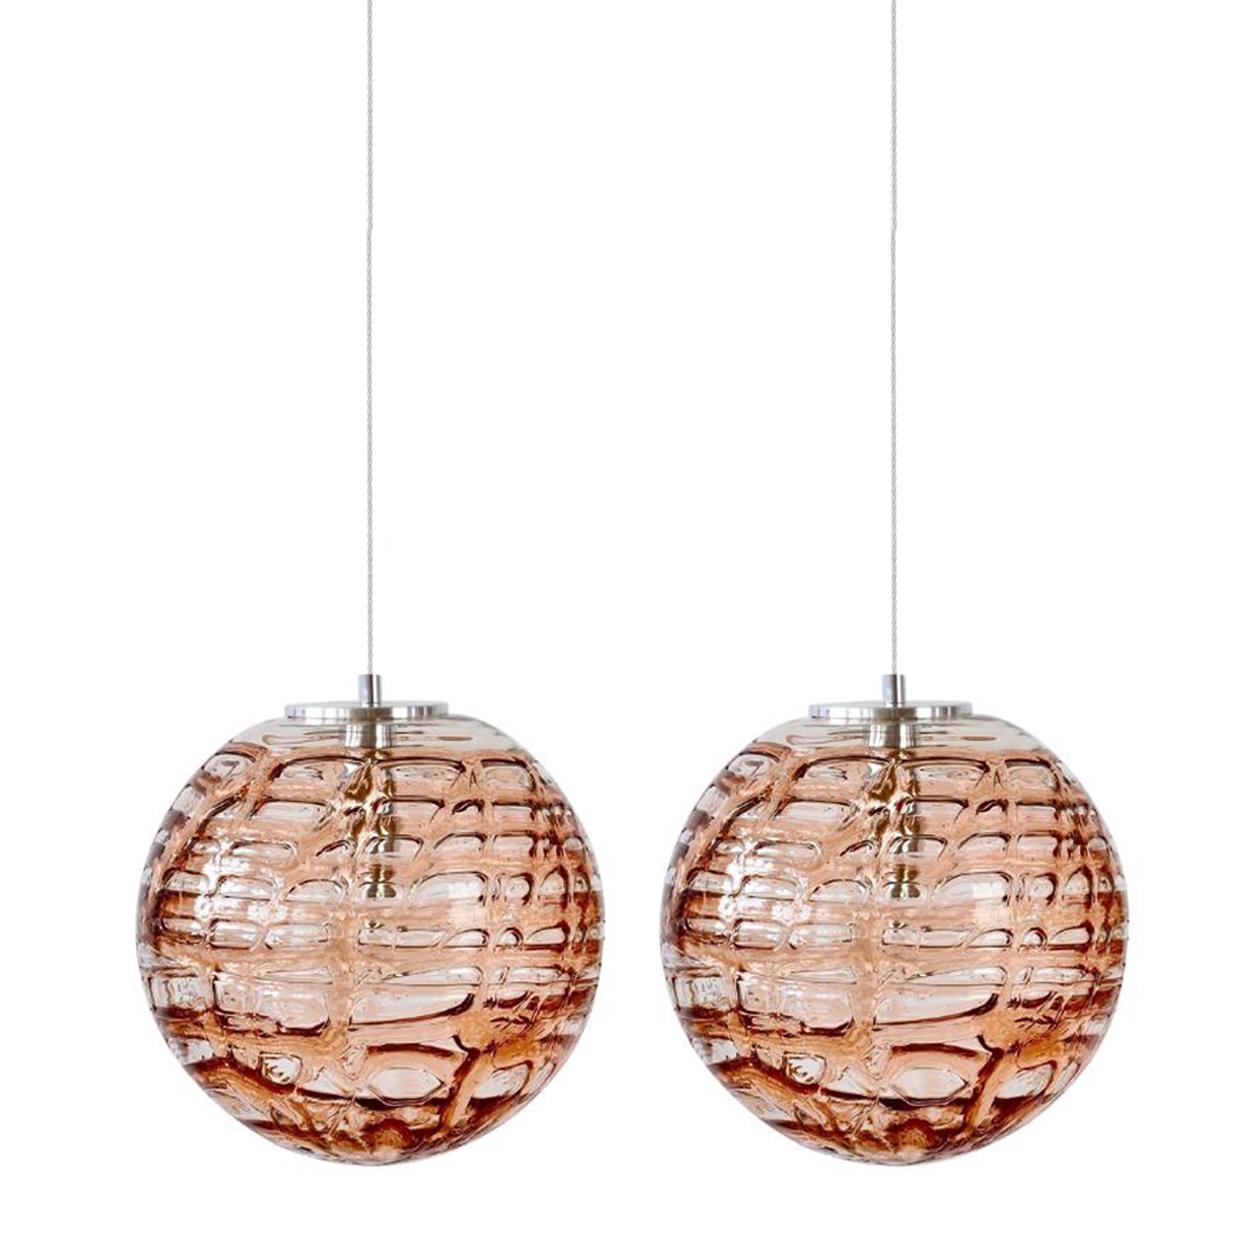 Steel Exceptional Pair of Pink Murano Glass Pendant Lights Venini Style, 1960